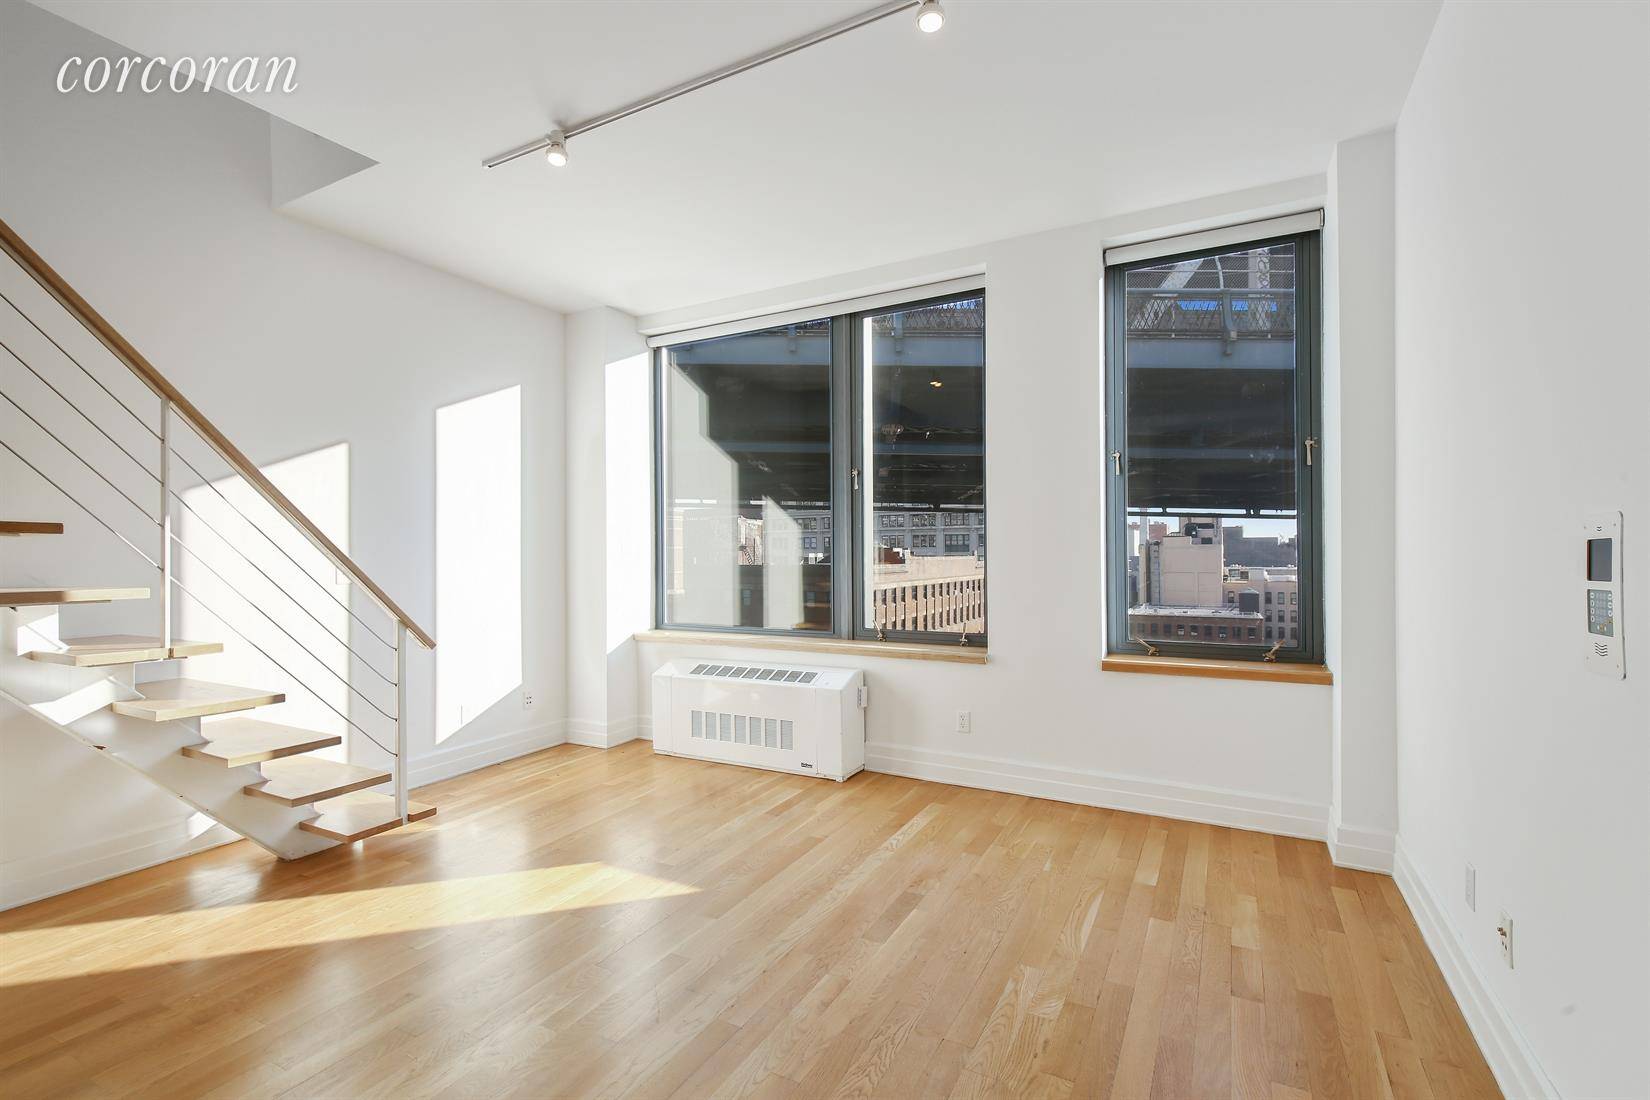 Rent this stunning 1 bedroom home with exceptional East River and Manhattan Bridge views.